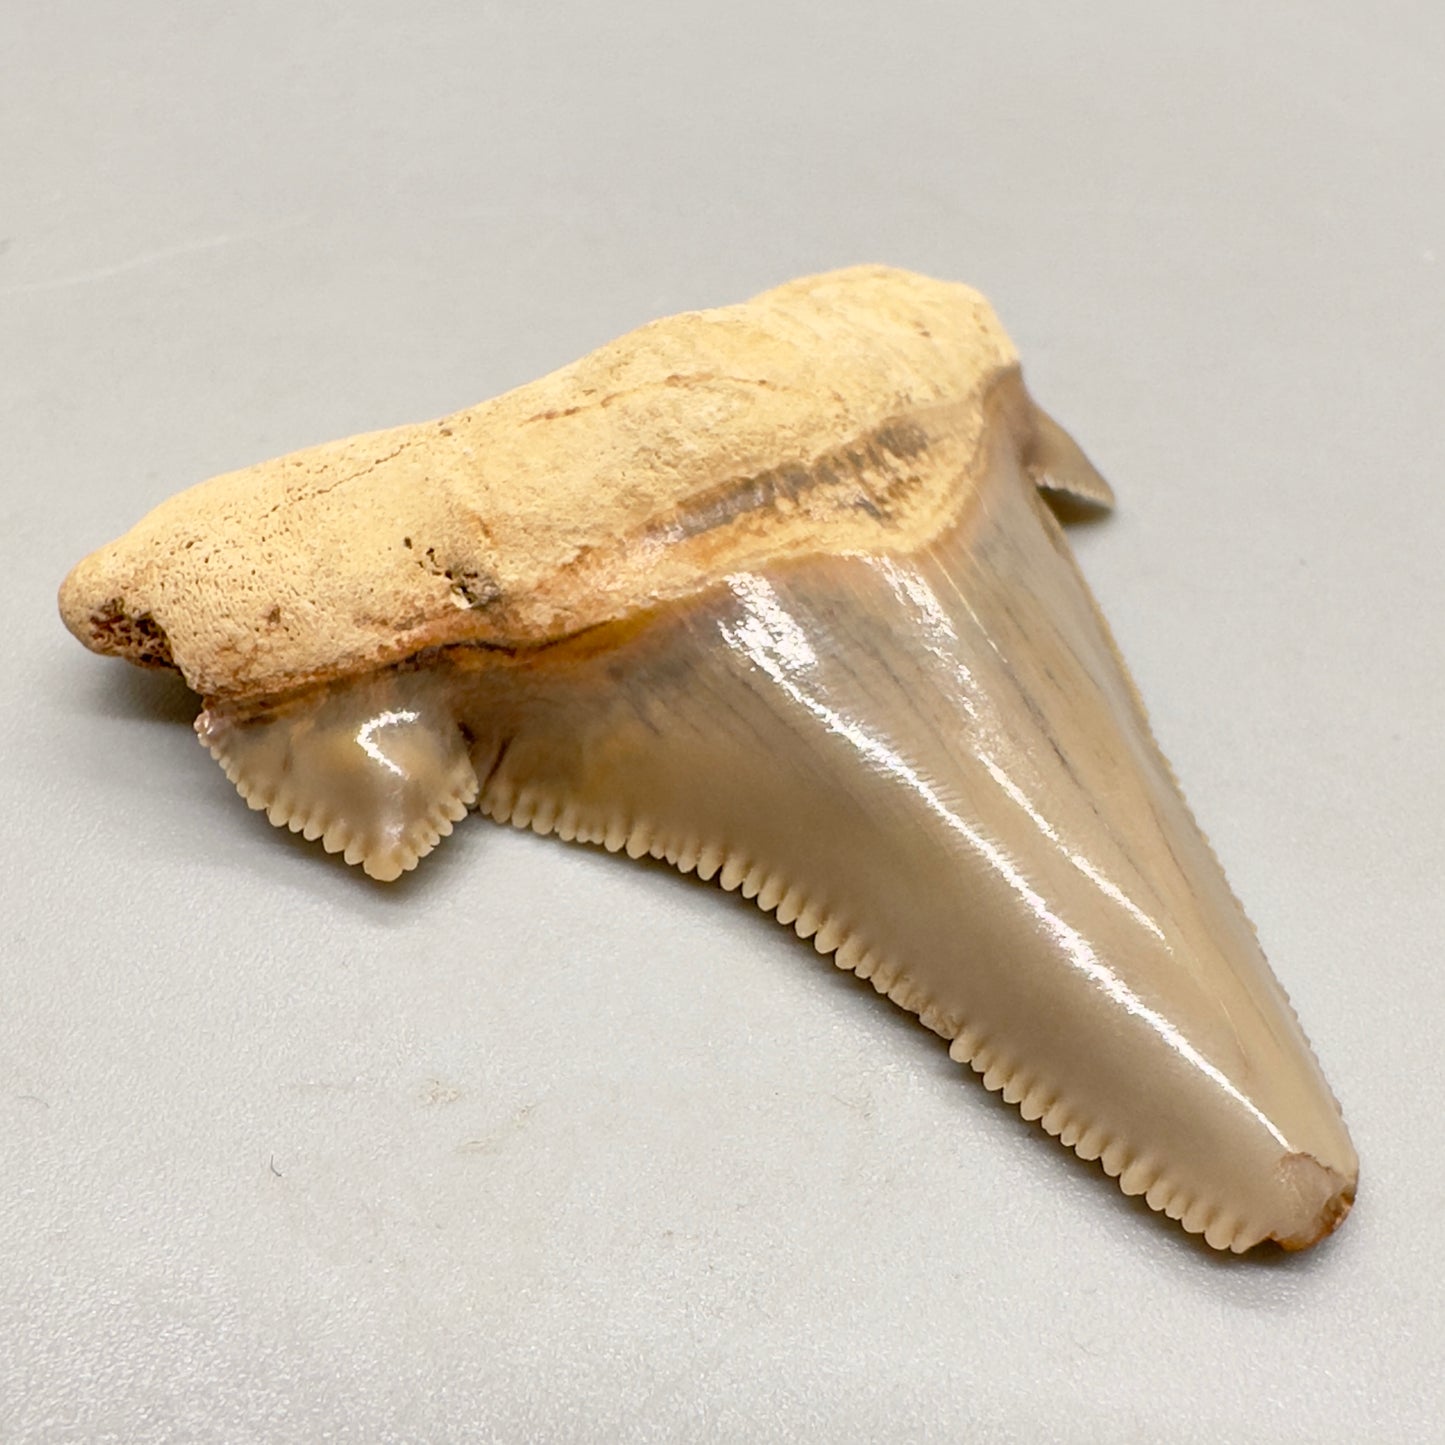 2.26 inches colorful serrated Carcharocles angustidens shark tooth from Summerville South Carolina AN409 front left